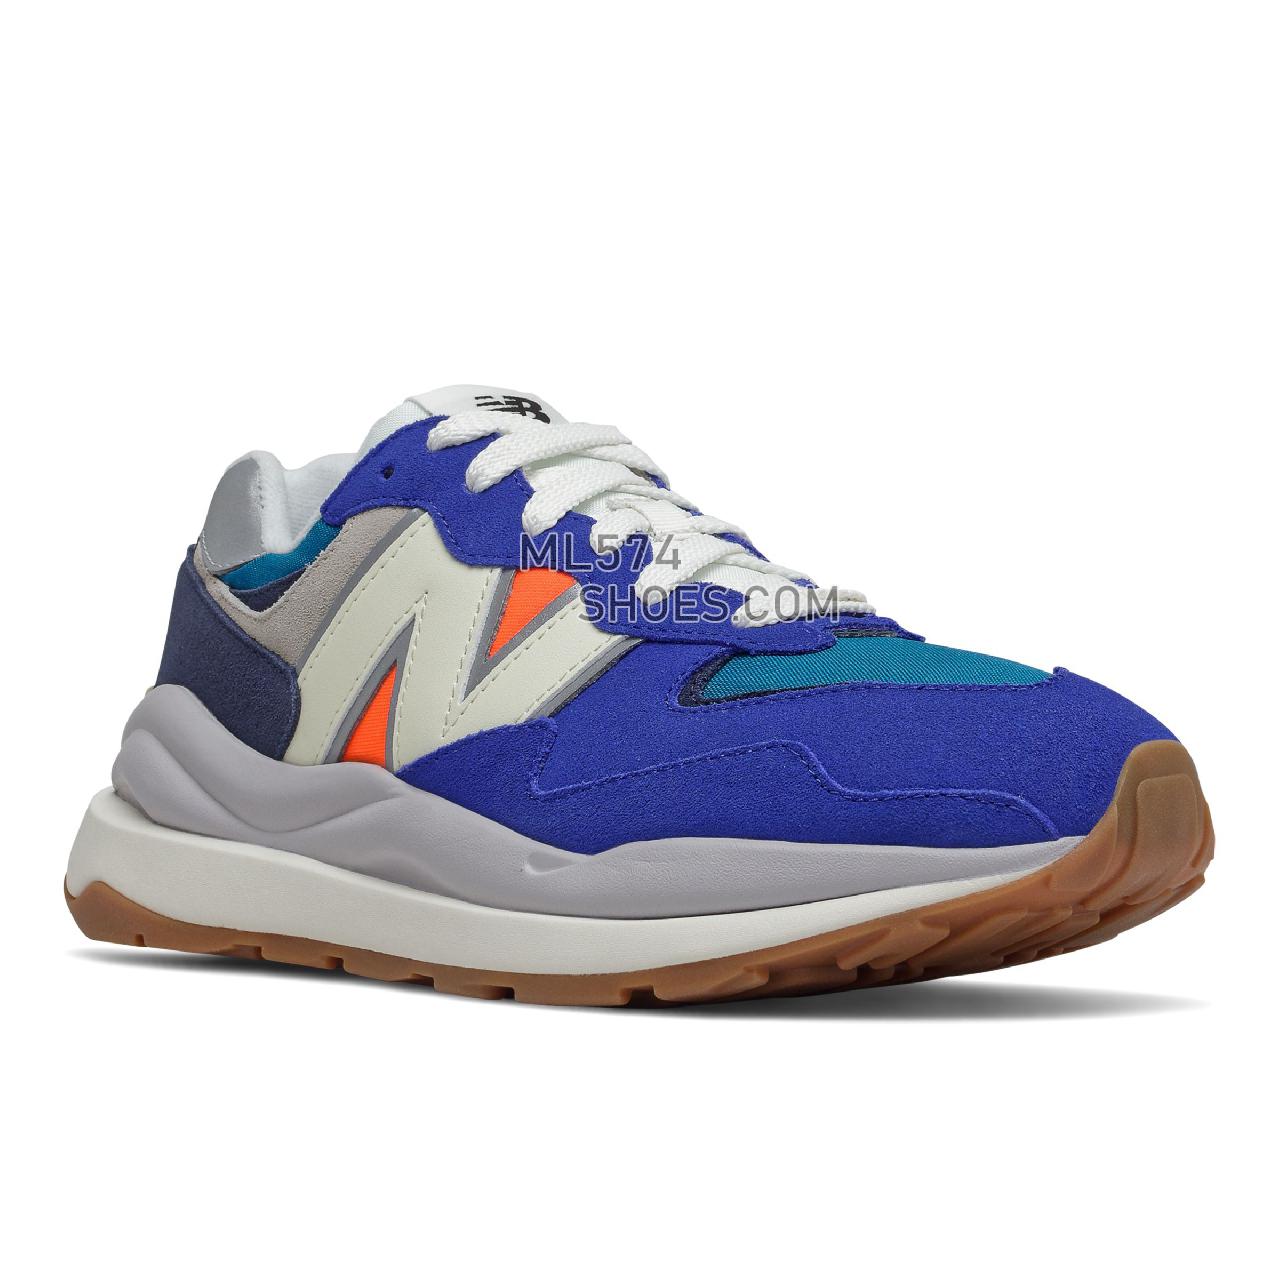 New Balance 57/40 - Men's Sport Style Sneakers - Team Royal with Orange - M5740DC1